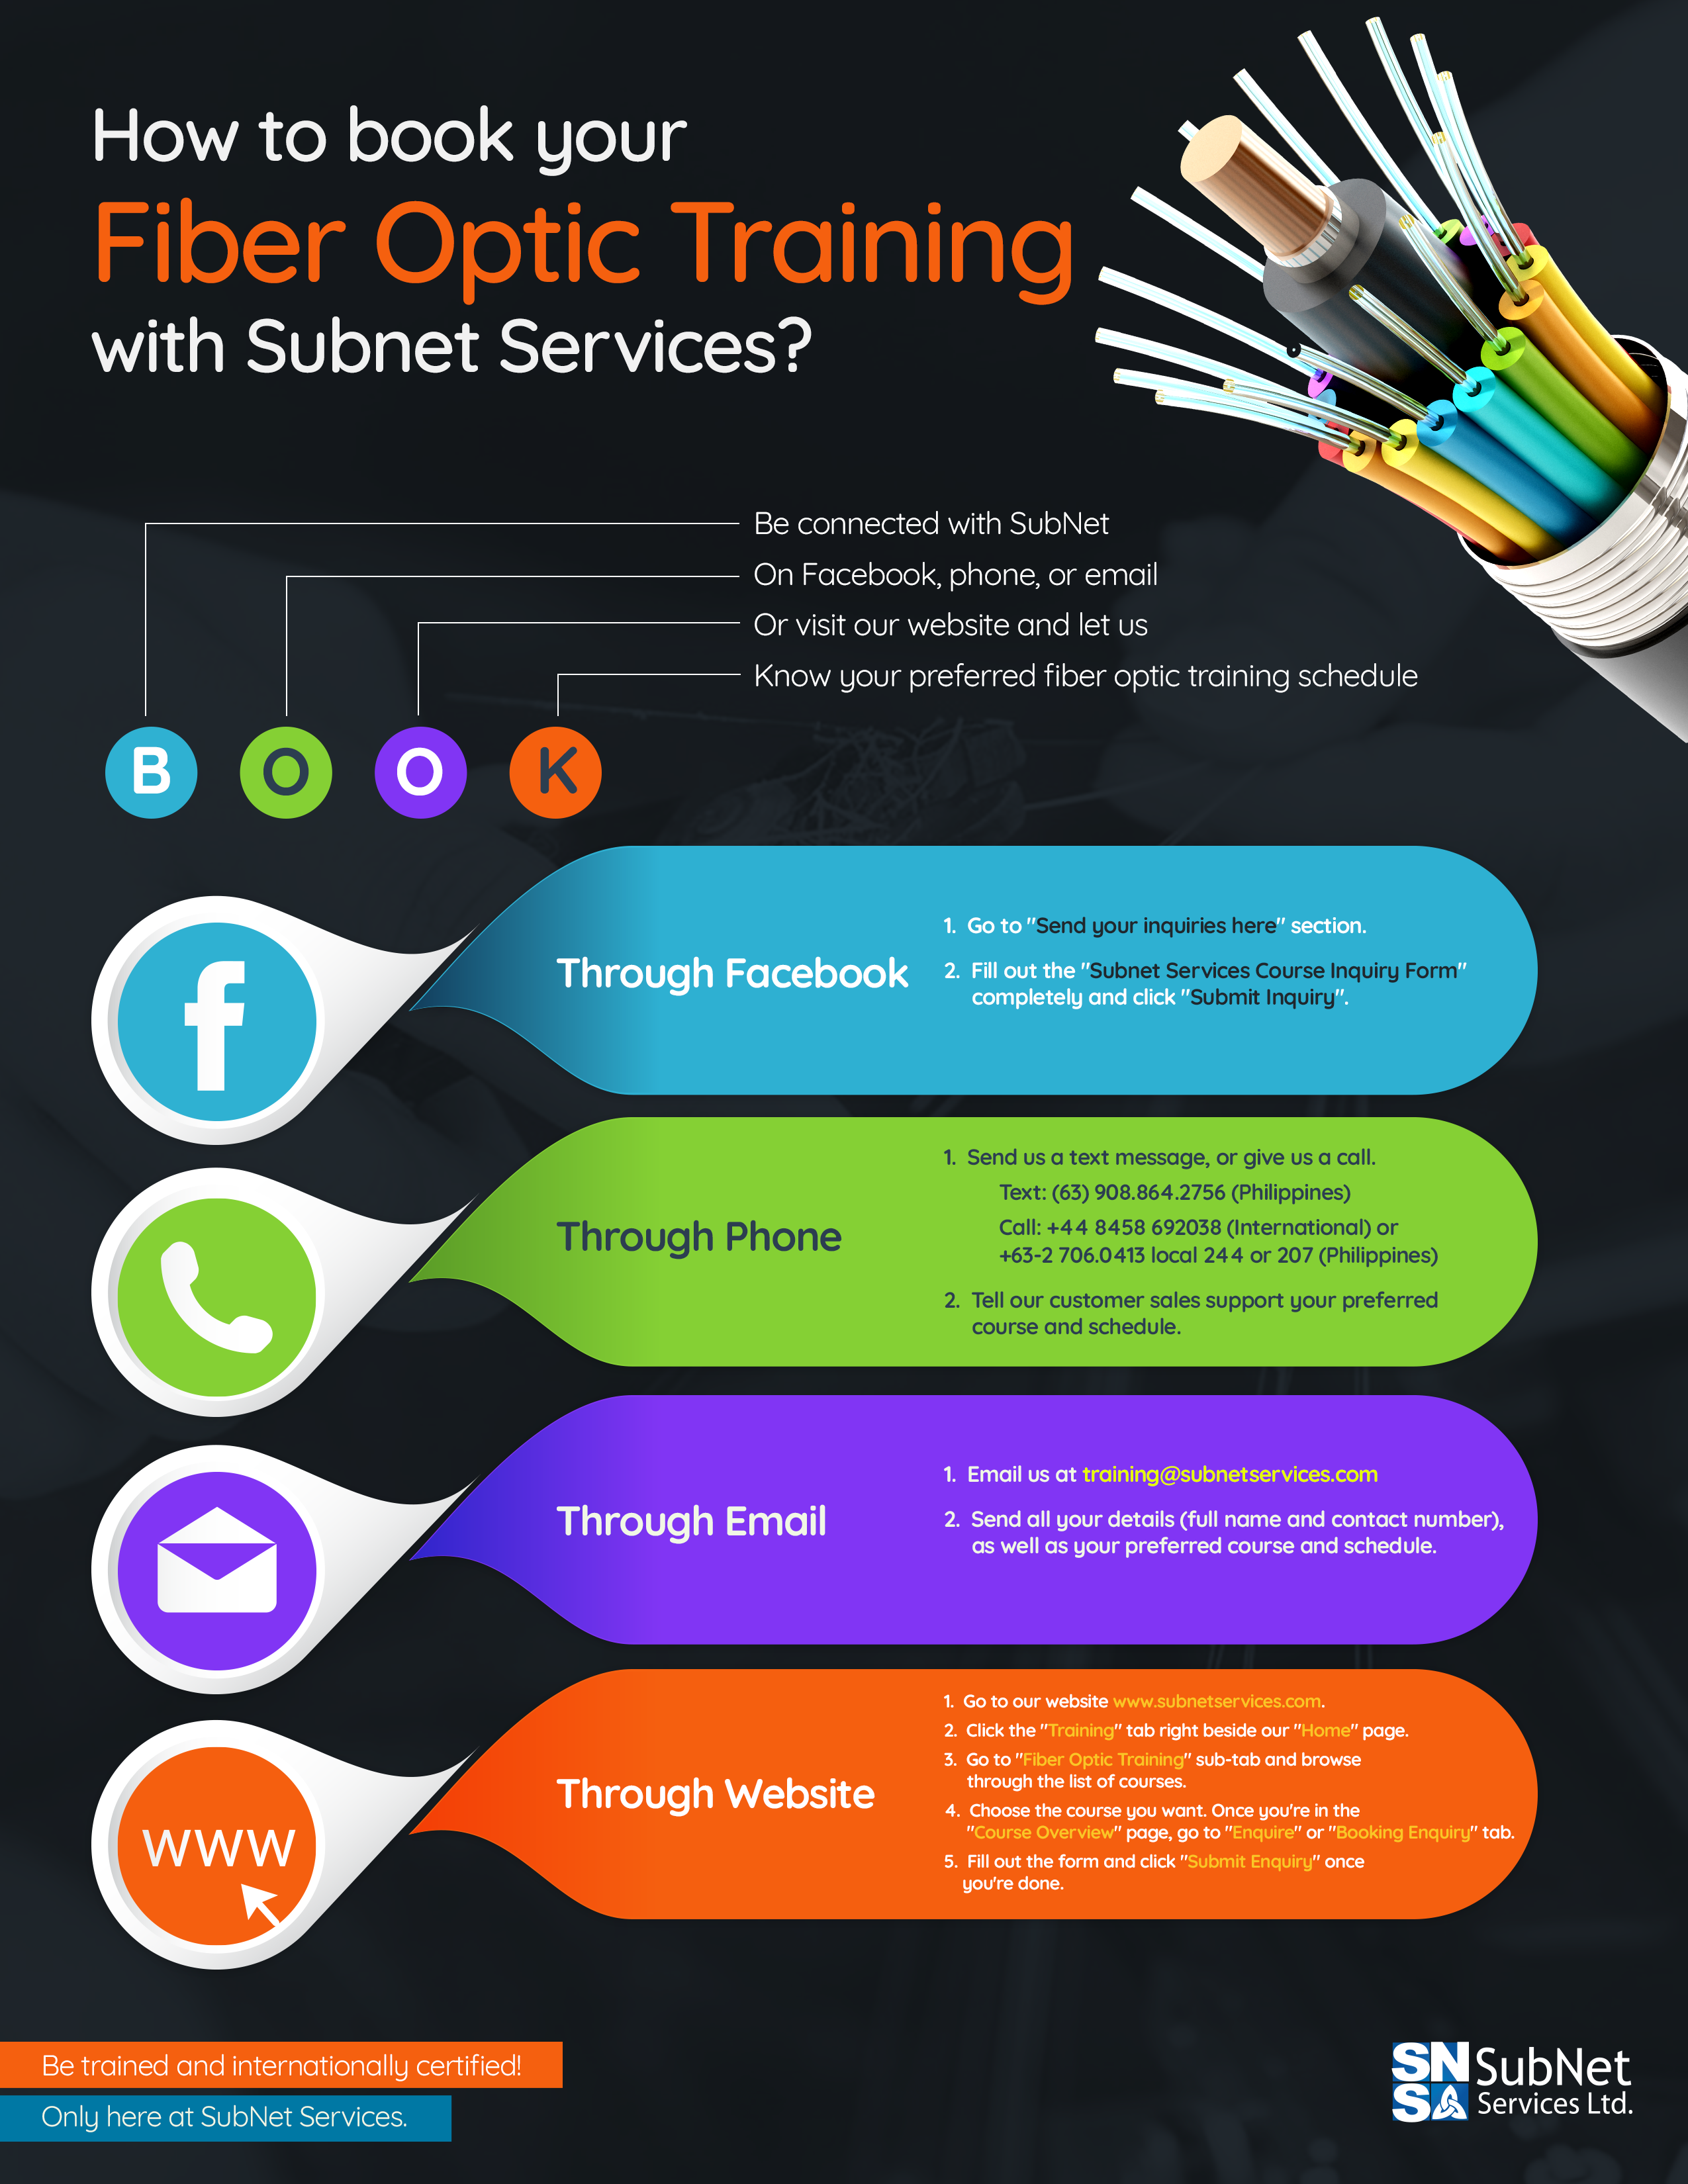 How to Book Your Fiber Optic Training with SubNet Services?